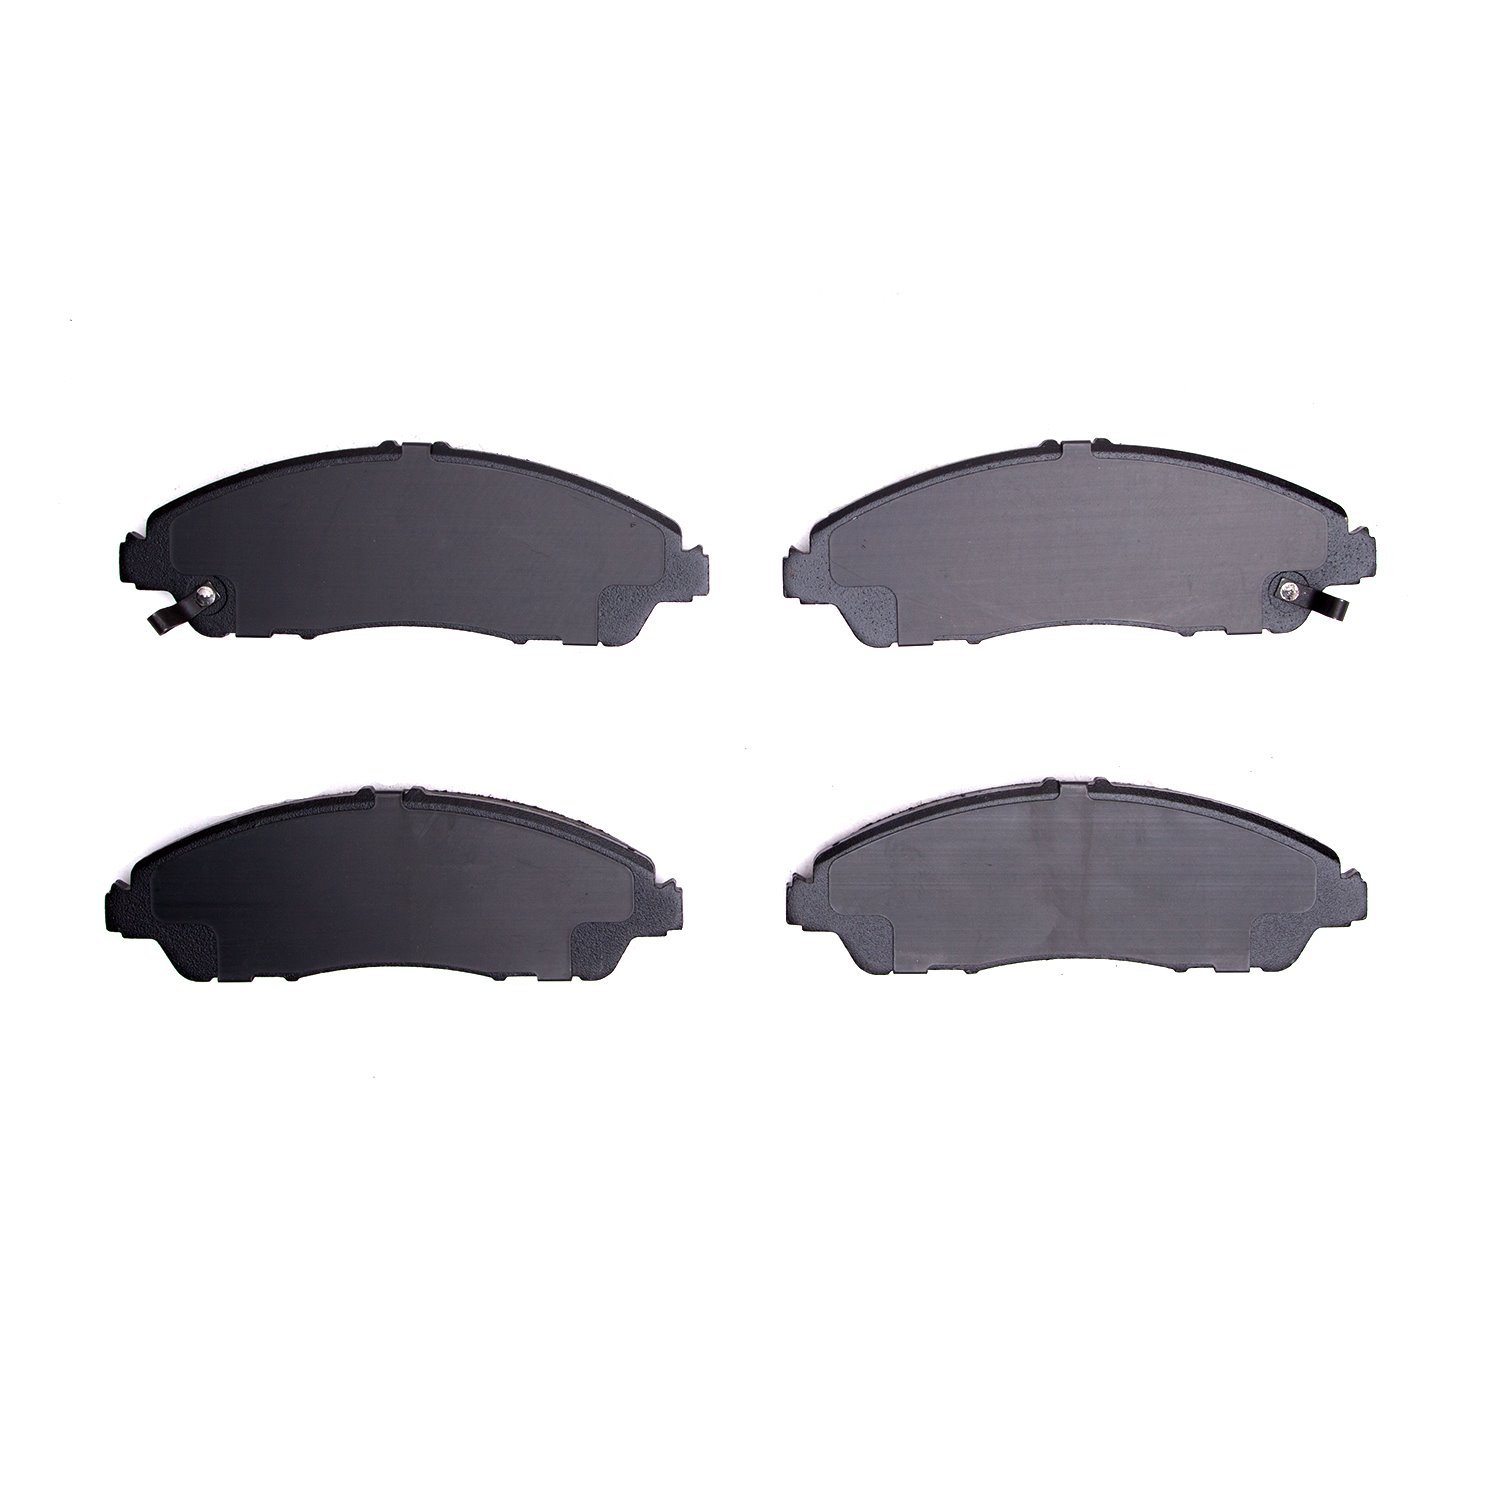 1000-1723-00 Track/Street Low-Metallic Brake Pads Kit, Fits Select Acura/Honda, Position: Front